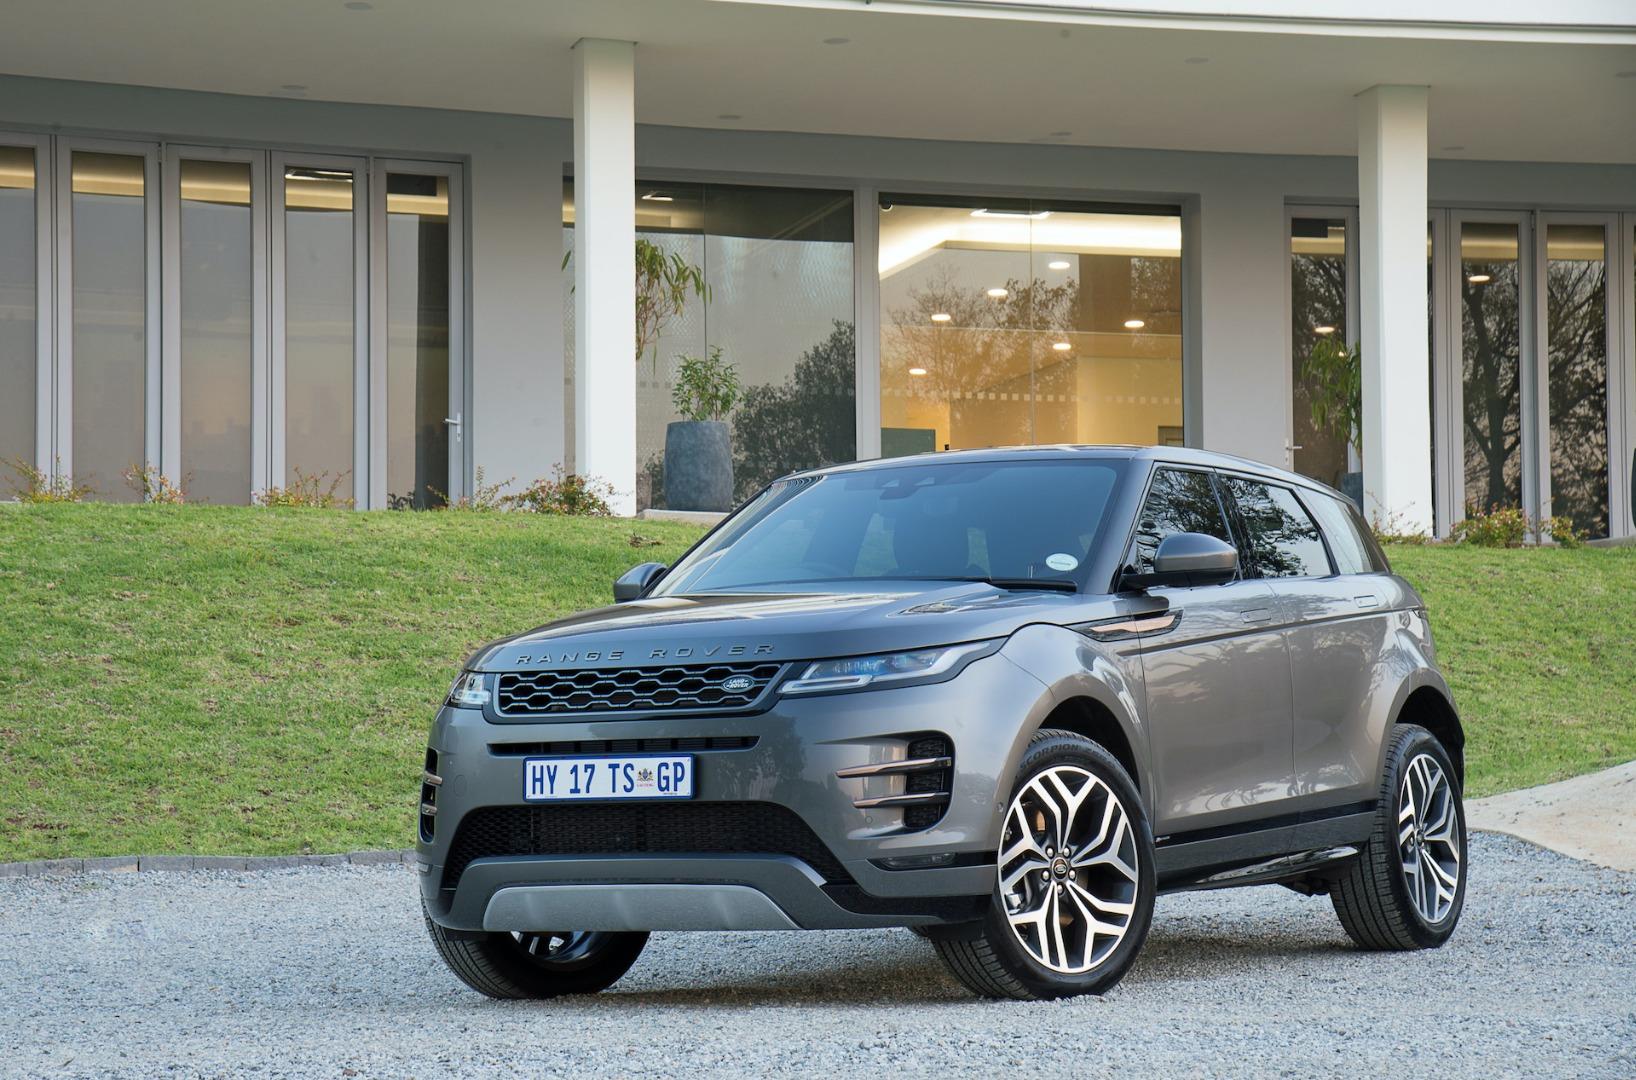 Which Range Rover Evoque is better diesel, petrol, or